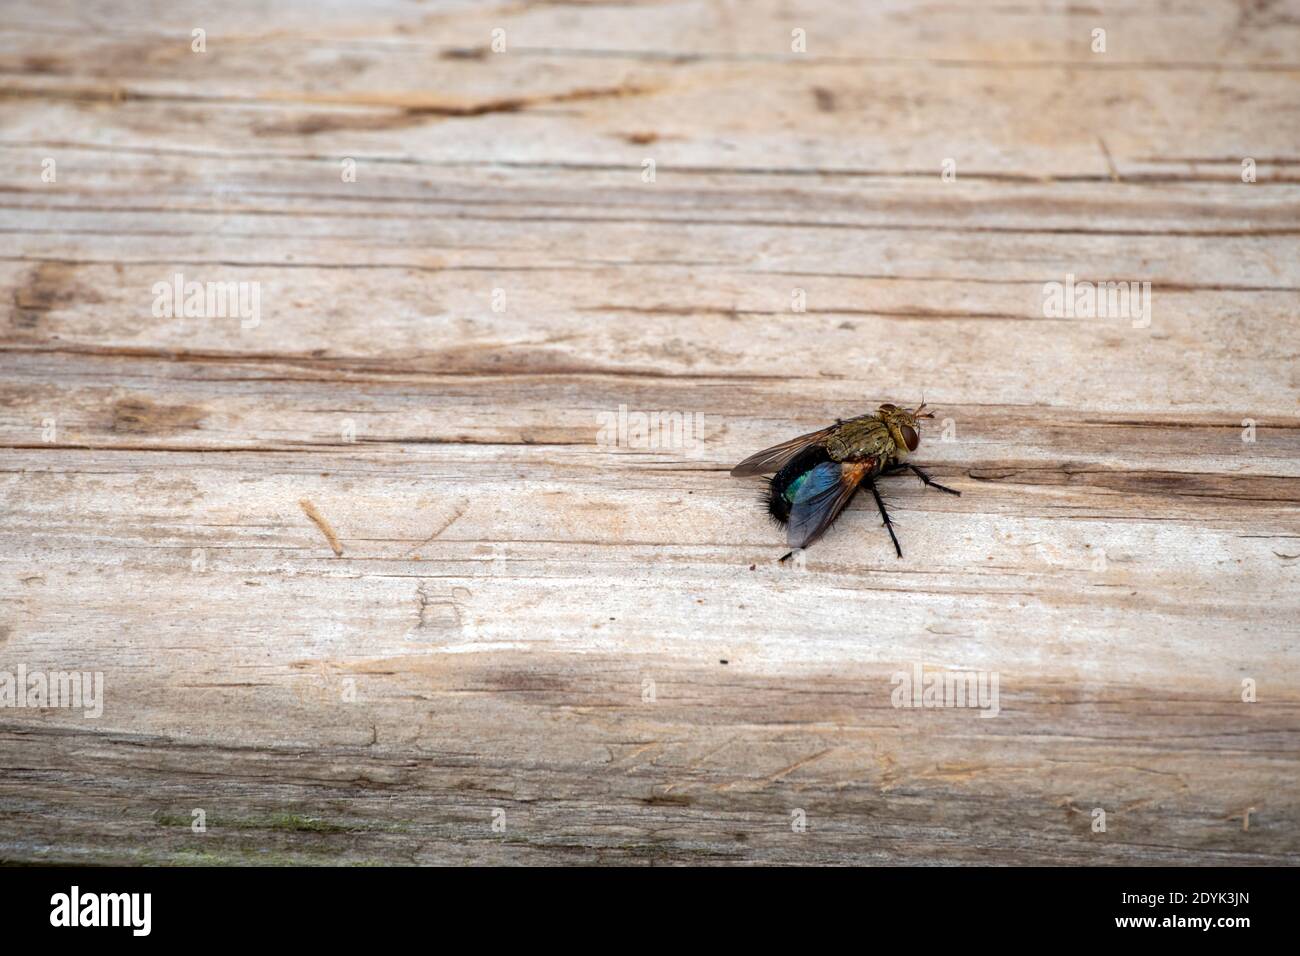 With a defocused effect, the eye is drawn to the pesky fly that rests on the wooden planks of a backyard deck in Missouri. Extermination might by appl Stock Photo